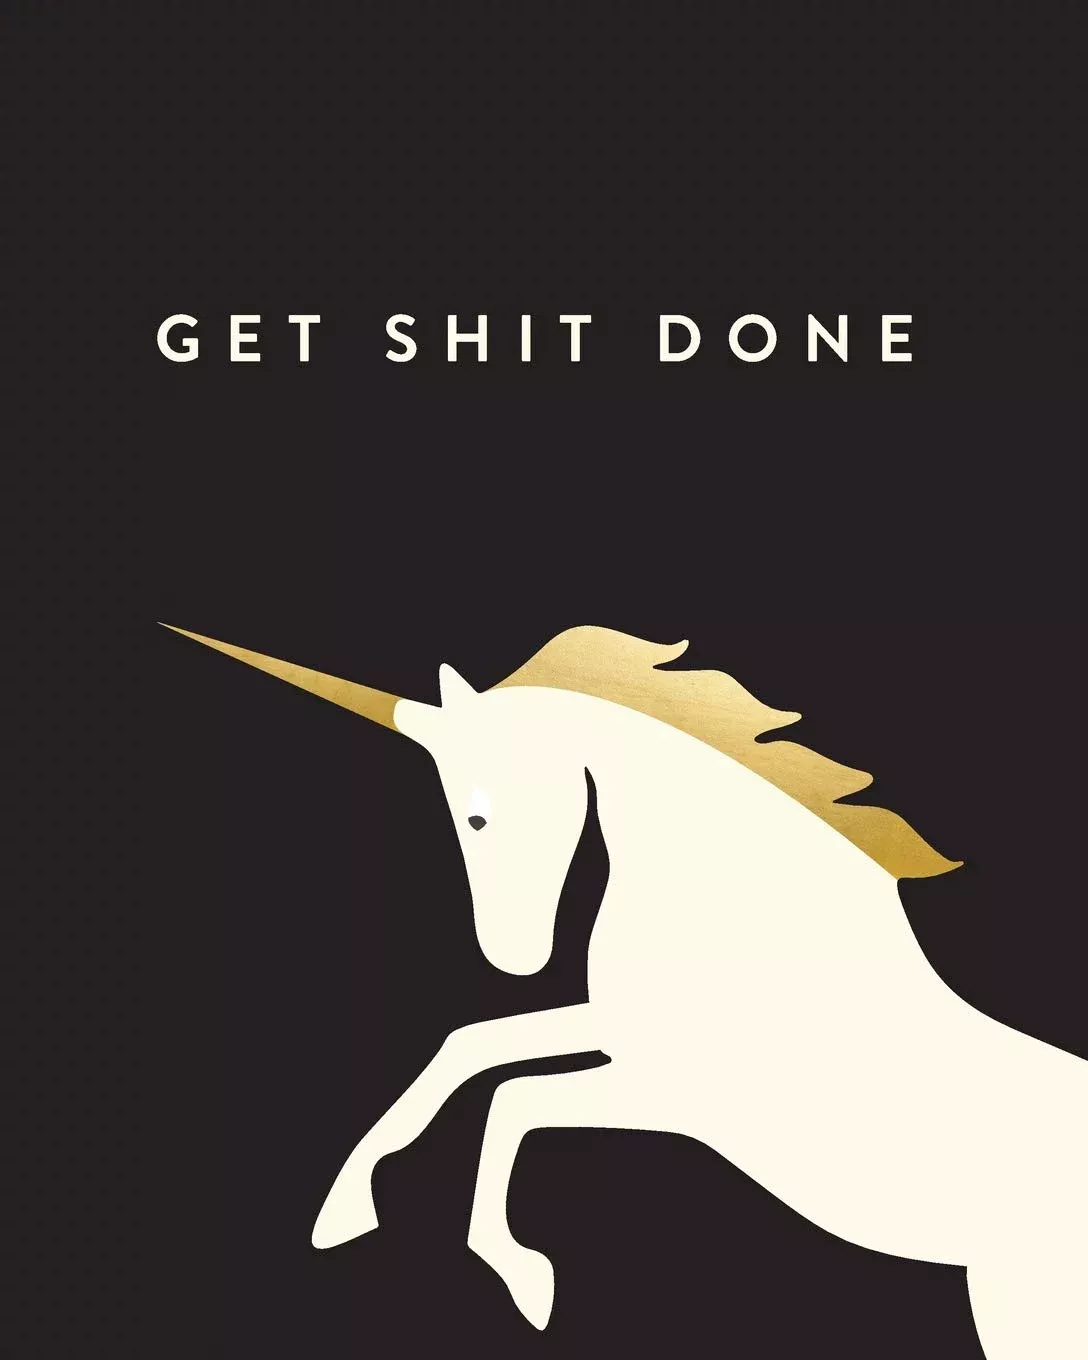 Best Coworker Gifts 2023: Get Shit Done Unicorn Notebook 2023